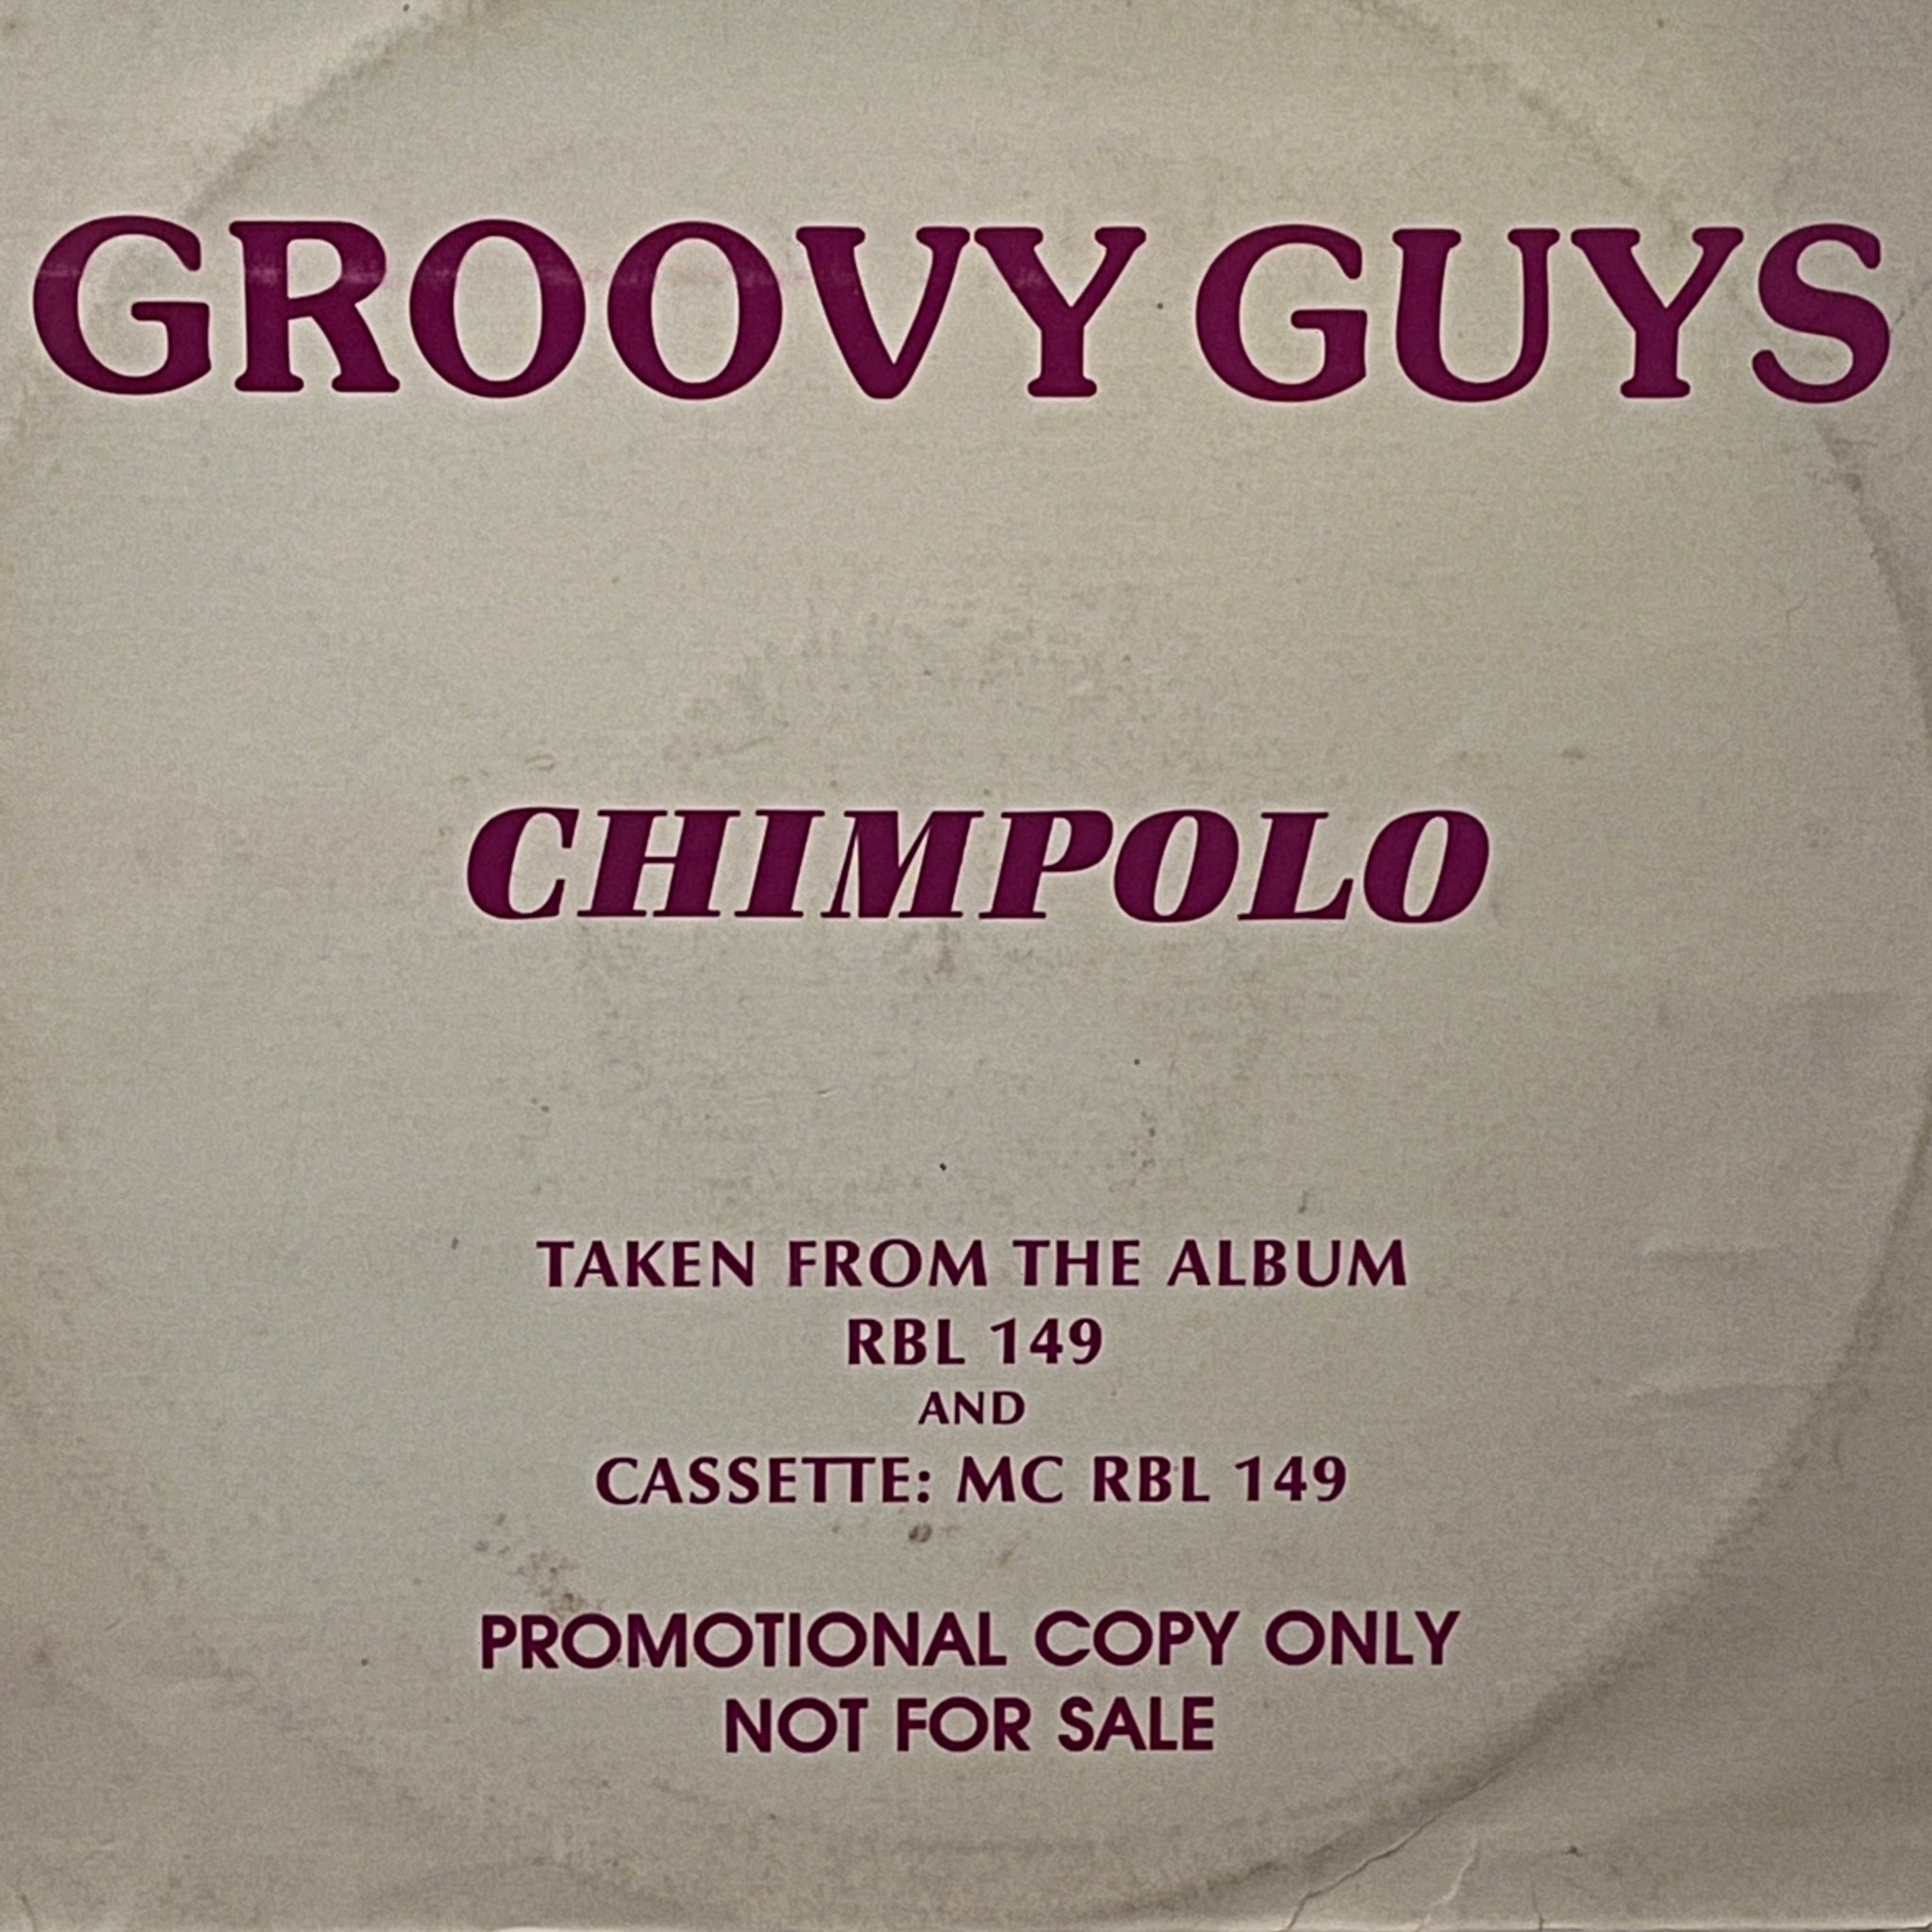 Chimpolo - Groovy Guys